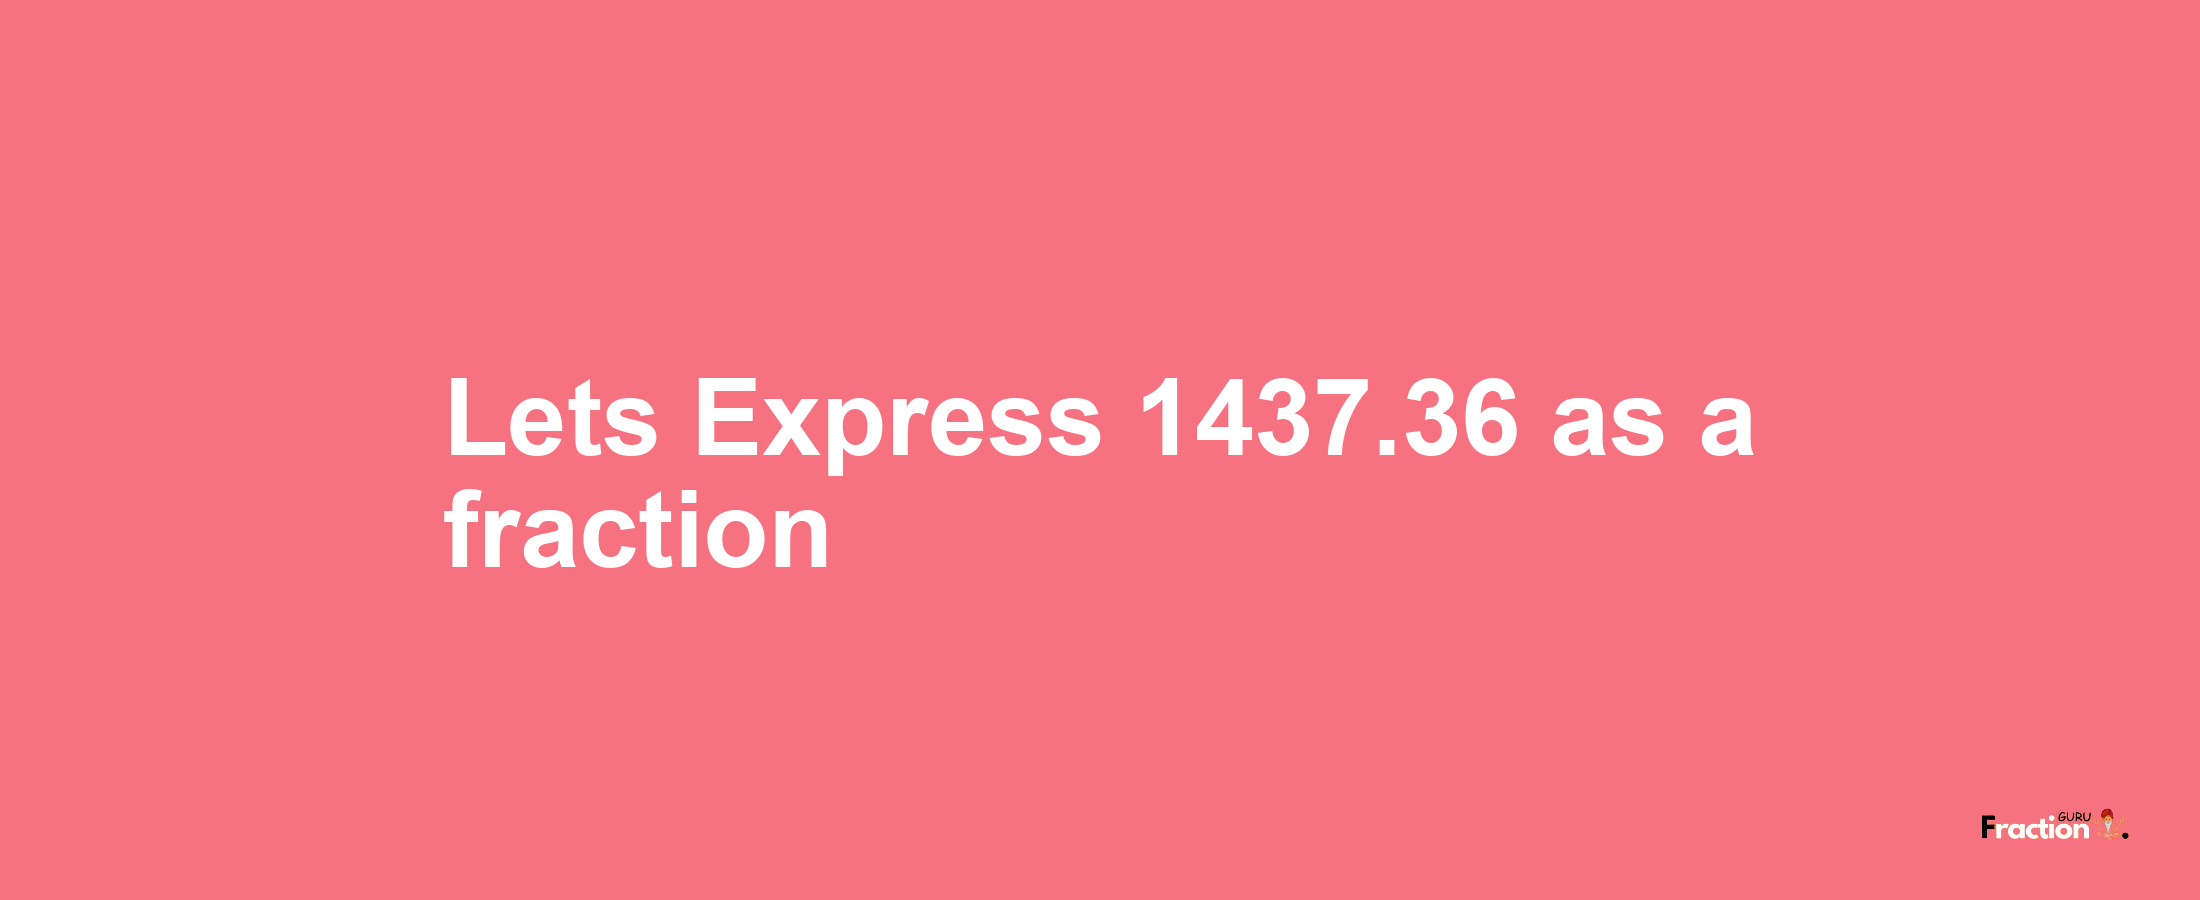 Lets Express 1437.36 as afraction